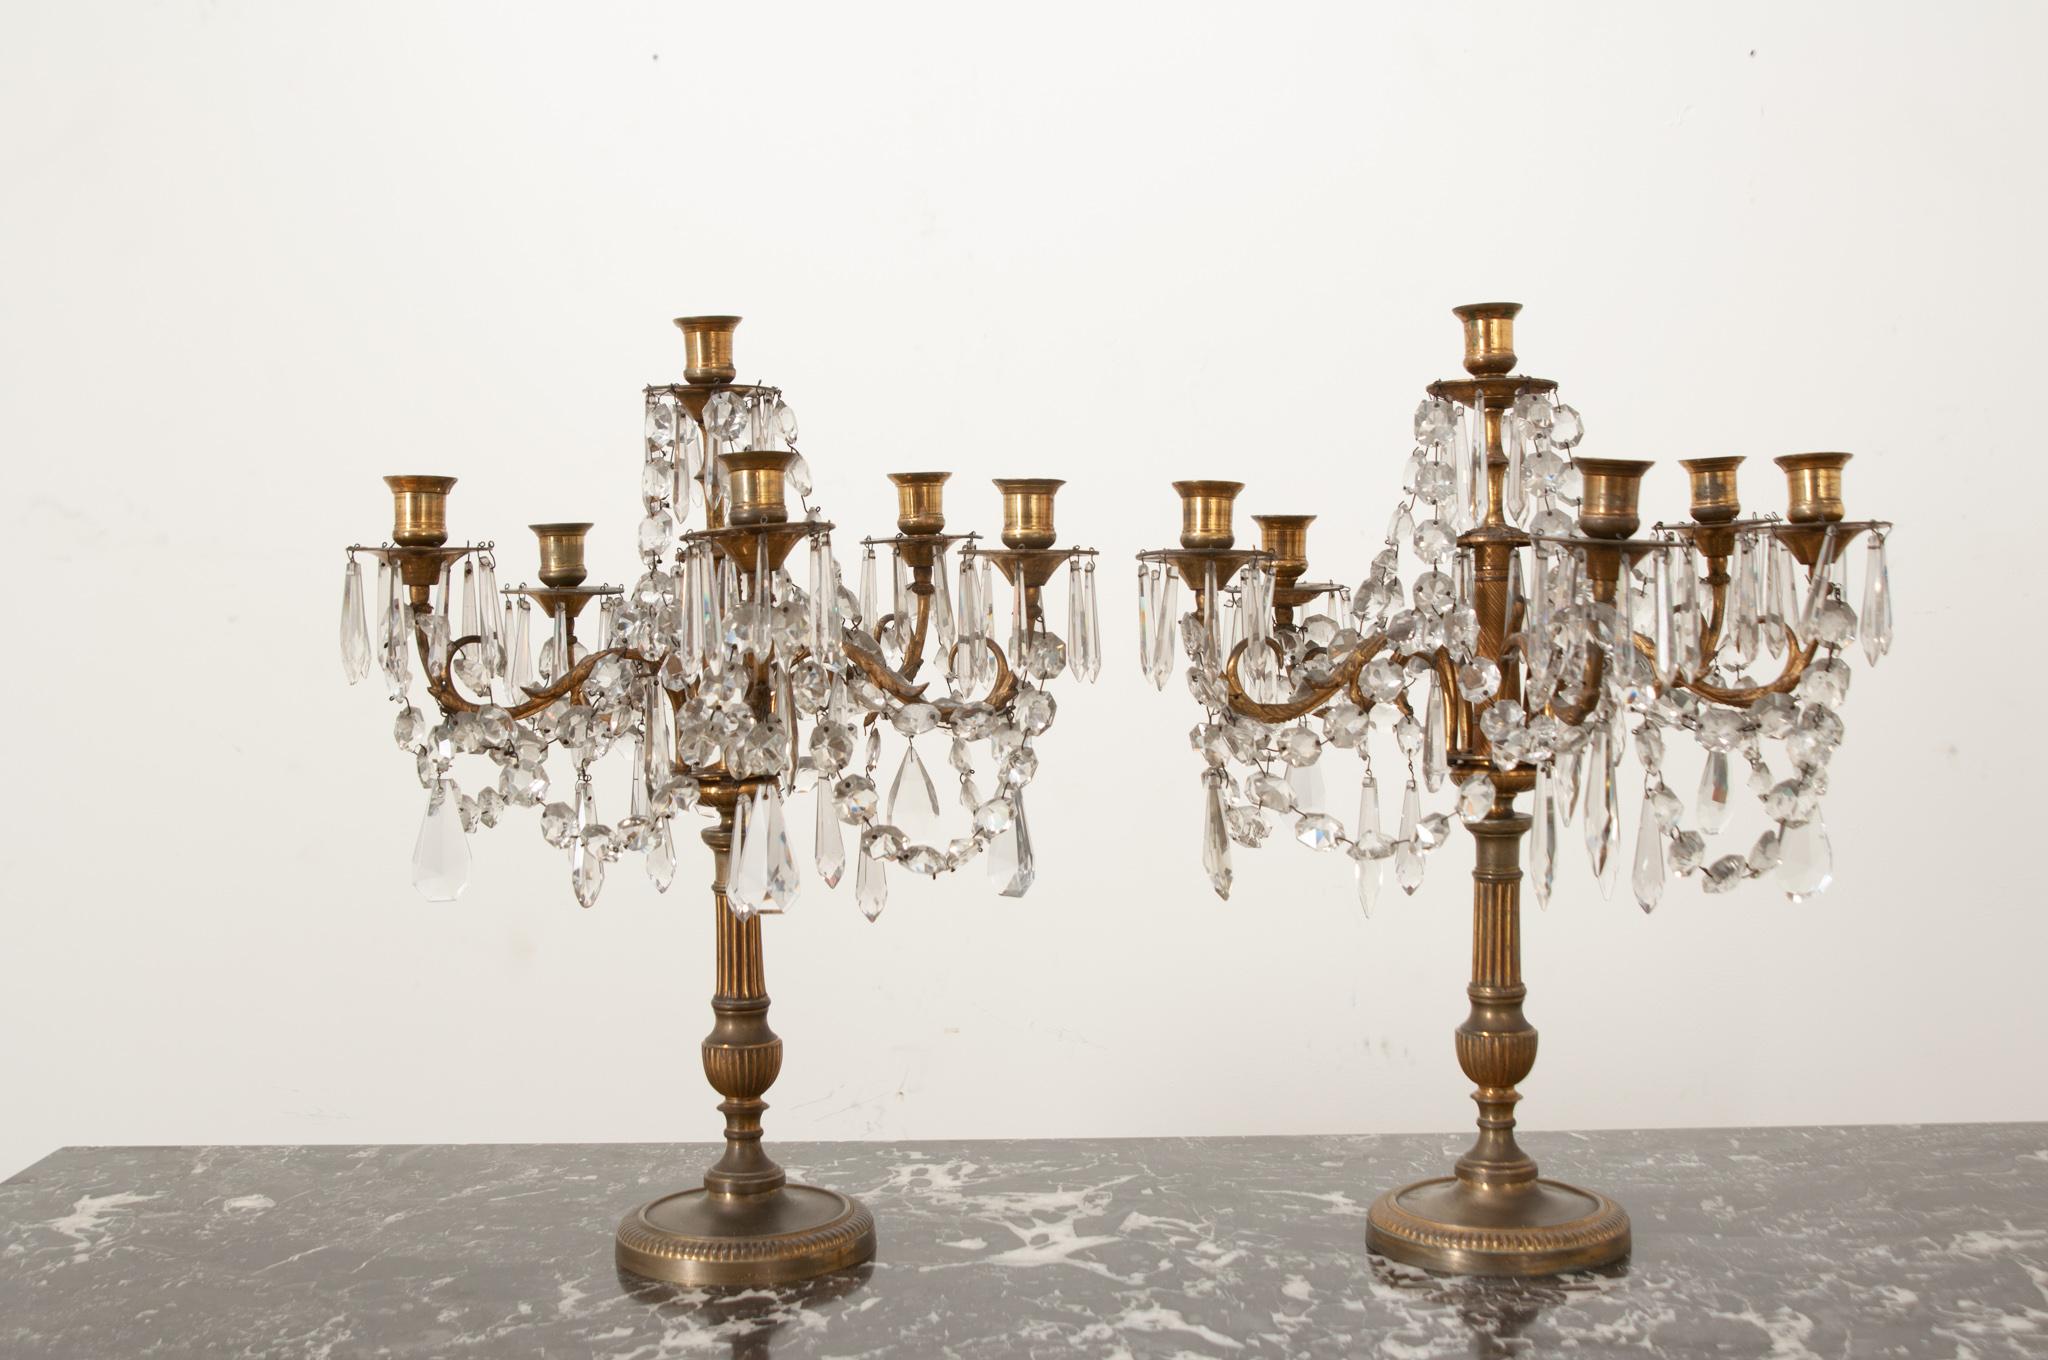 French Pair of Louis XVI Style Girandoles In Good Condition For Sale In Baton Rouge, LA